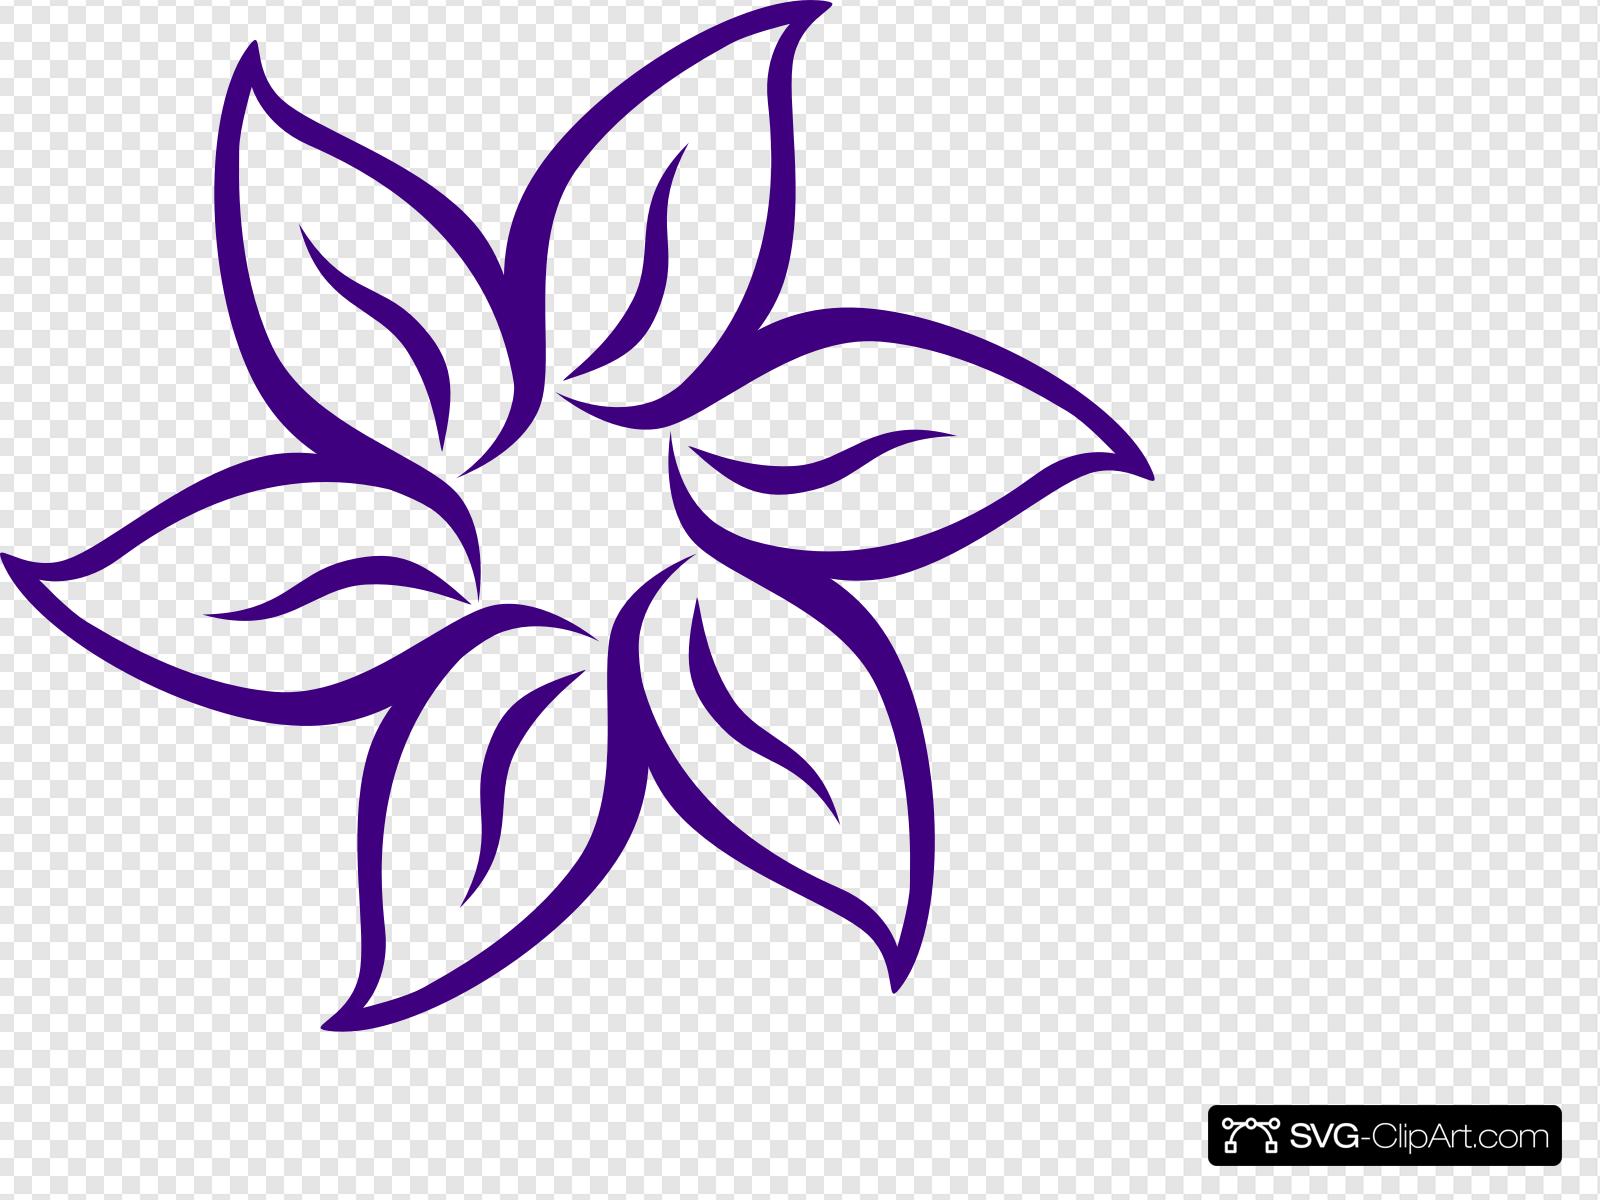 Purple Flower Outline Clip art, Icon and SVG